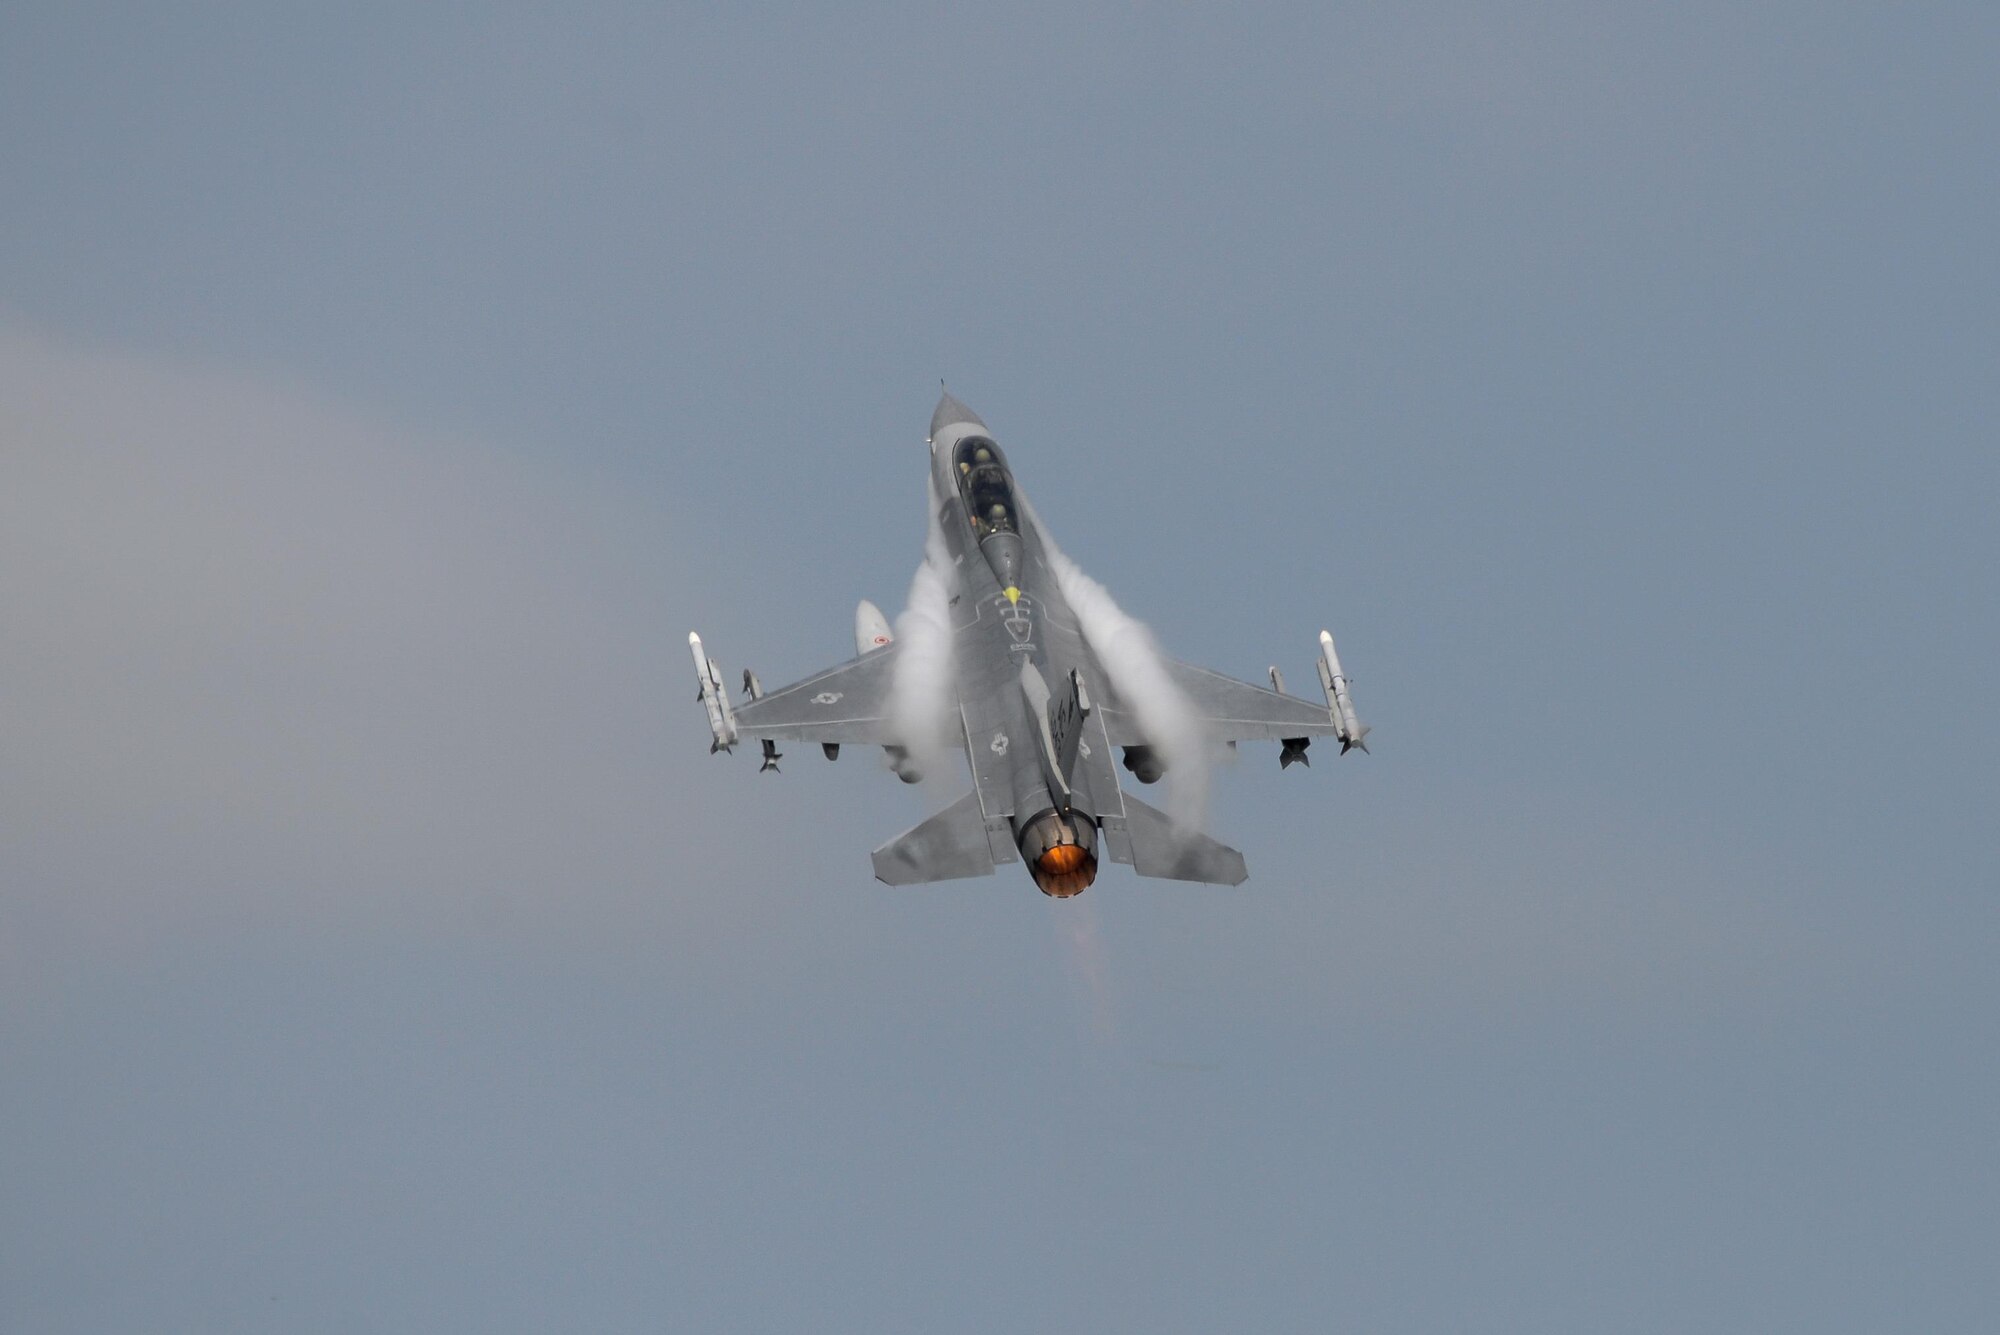 An F-16D Fighting Falcon, piloted by Col. John R. DiDonna, the commander of the New Jersey Air National Guard’s 177th Fighter Wing, takes off in afterburner with Brig. Gen. Robert C. Bolton in the back seat for his "fini flight" at the Atlantic City Air National Guard Base in Egg Harbor Township, N.J., Aug. 16, 2016. (U.S. Air Force photo/Master Sgt. Andrew J. Moseley)